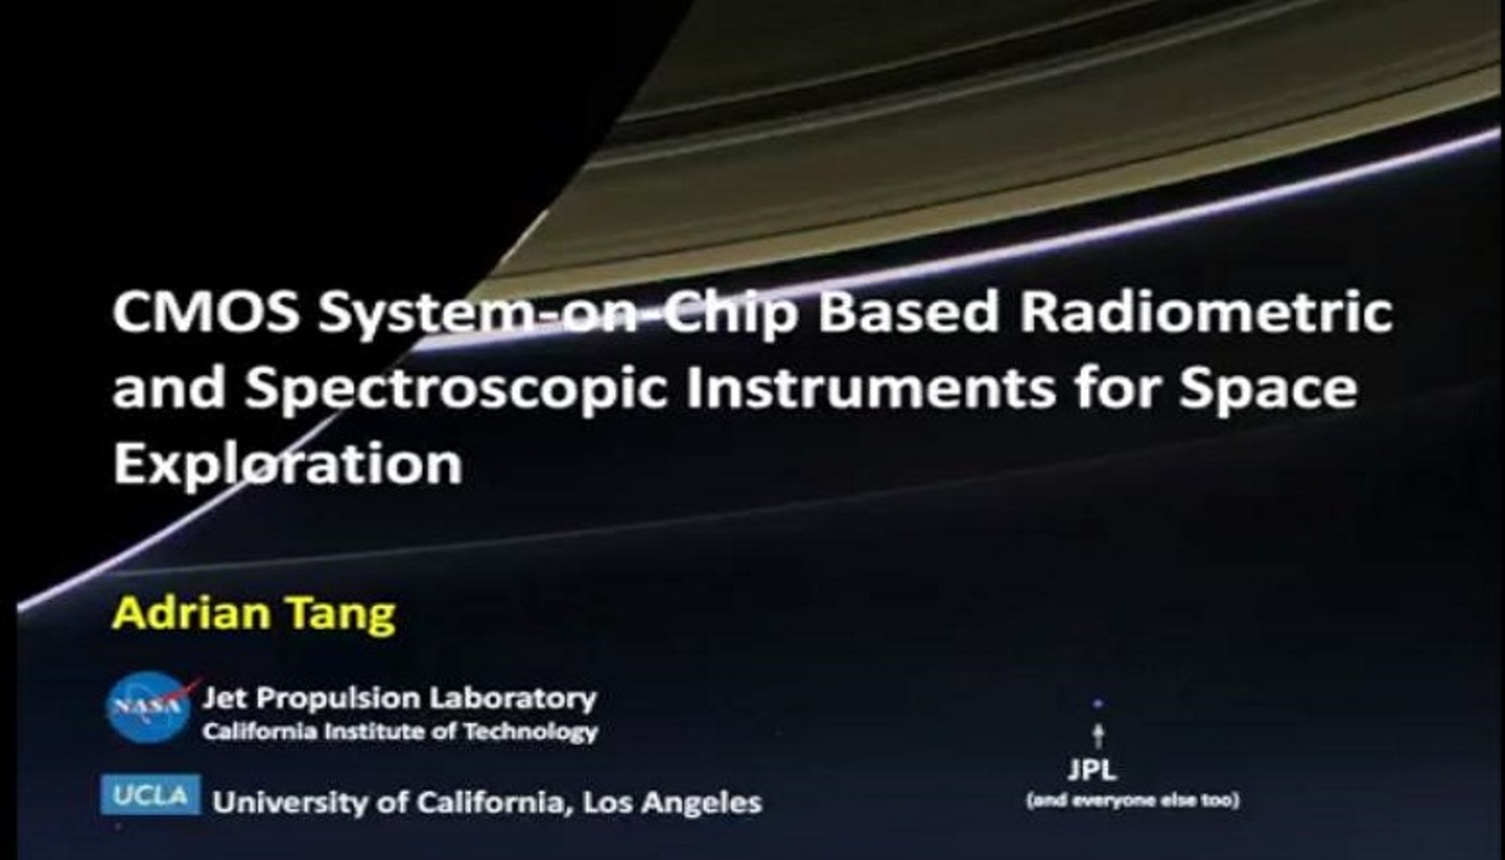 CMOS System on Chip Based Radiometric and Spectroscopic Instruments for Space Exploration